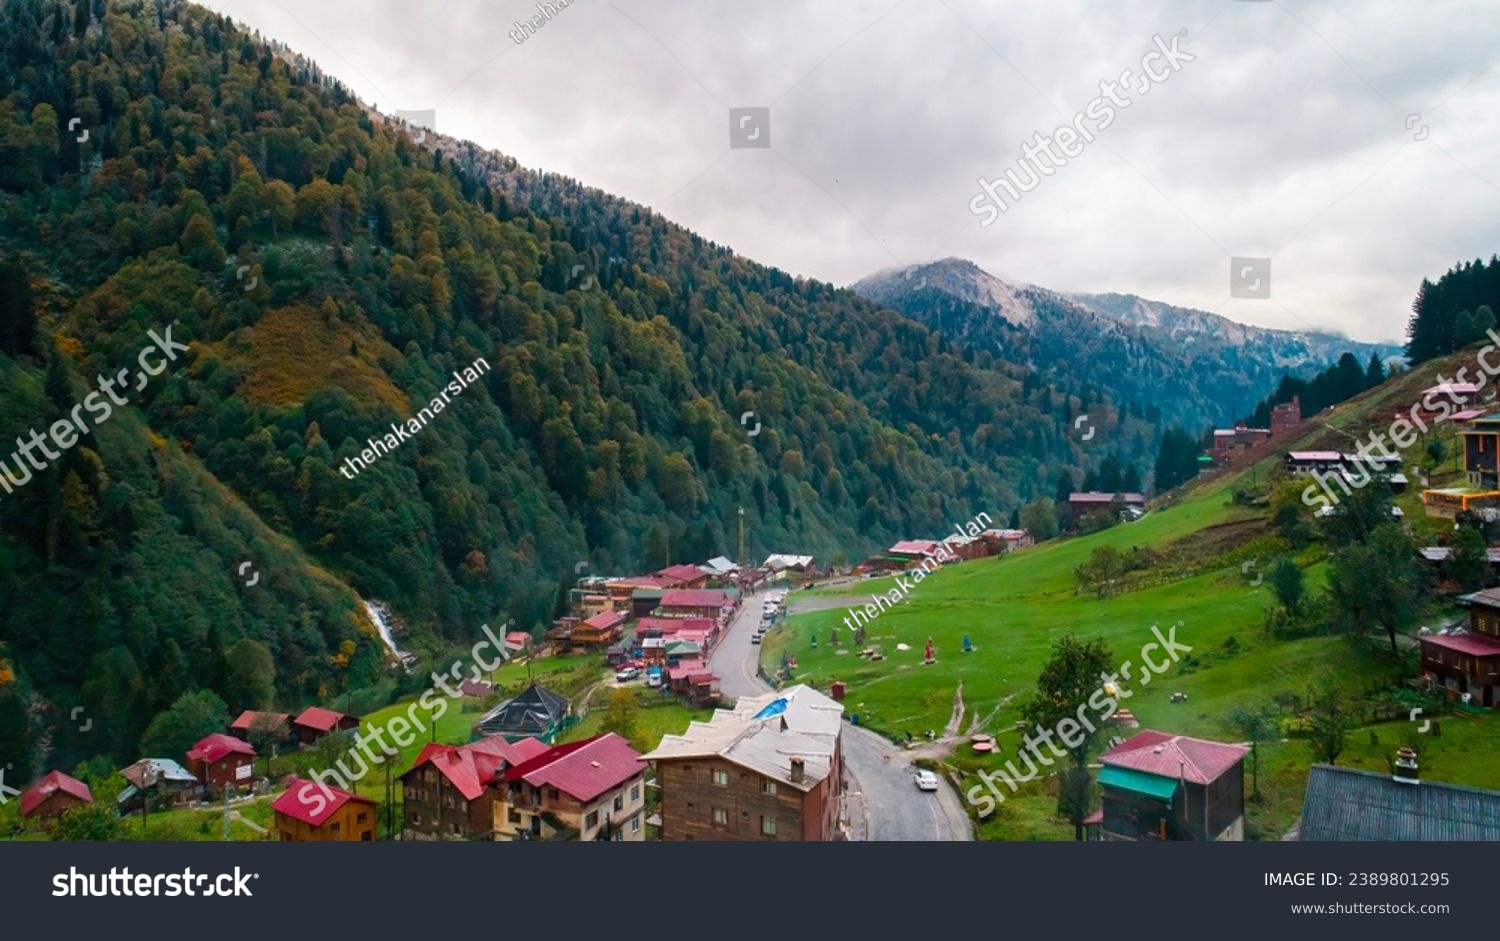 General landscape view of Ayder Plateau in Rize. Ayder Plateau has a wide meadow area with excellent nature views and wooden chalets. Rize, Camlihemsin, Turkey. #2389801295